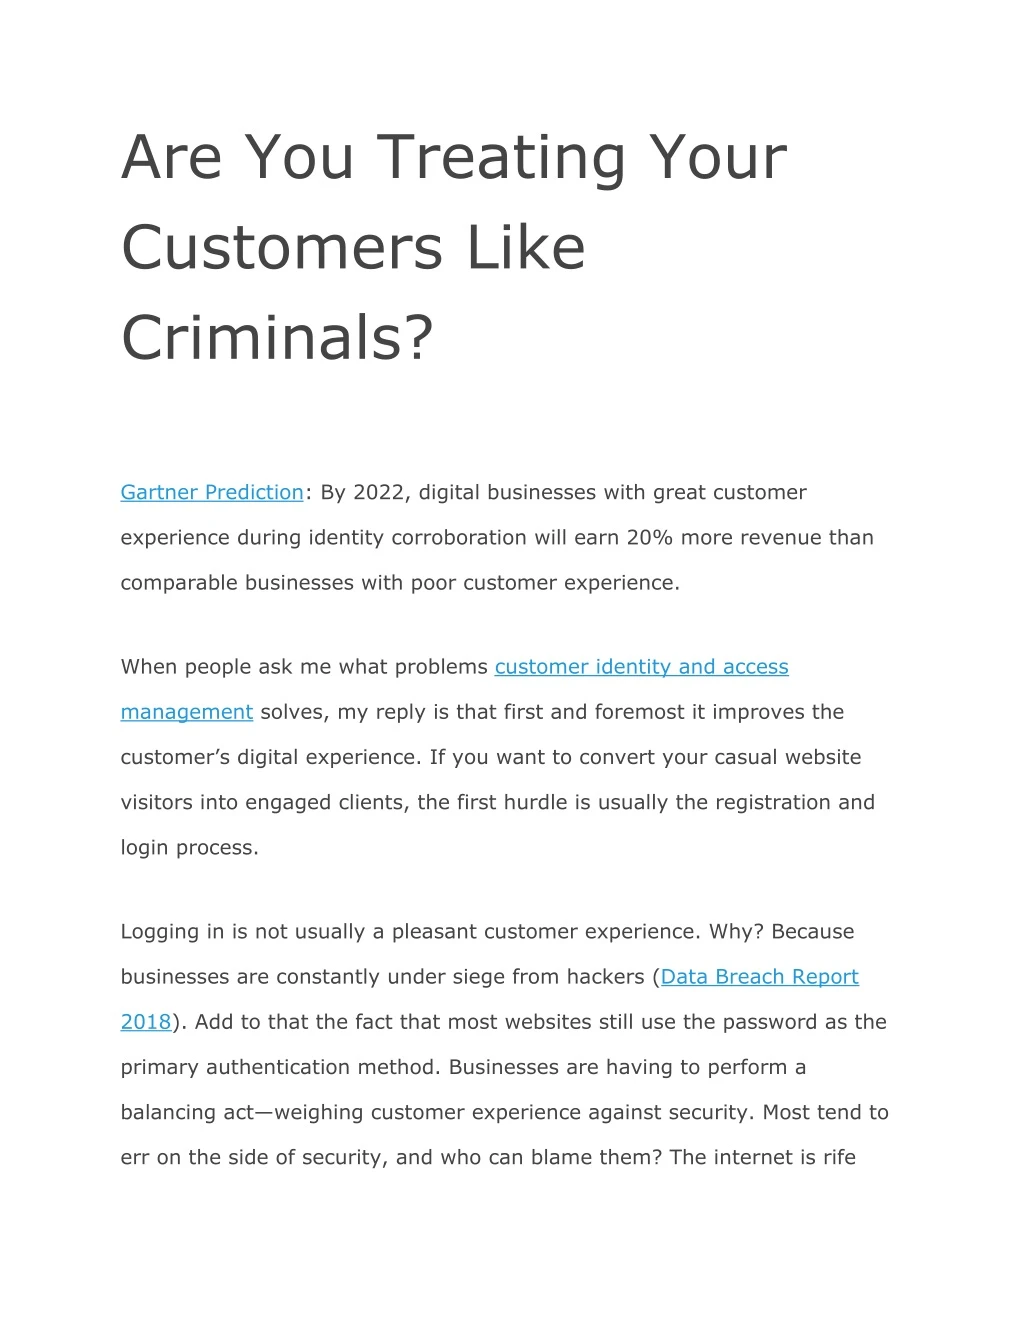 are you treating your customers like criminals